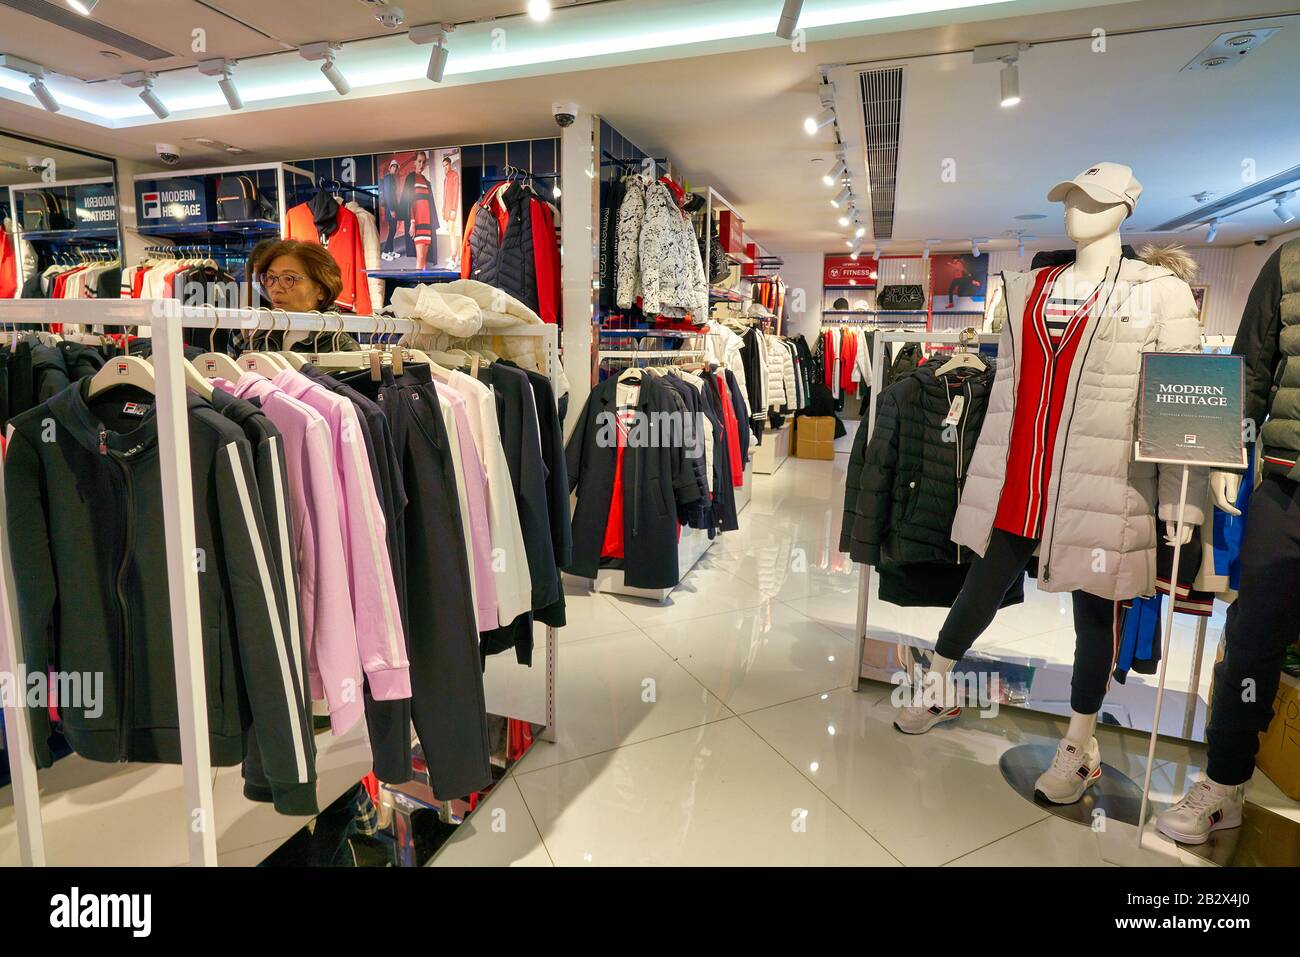 HONG KONG, CHINA - JANUARY 23, 2019: clothes on display at Fila store in  New Town Plaza. New Town Plaza is a shopping mall in the town centre of Sha  T Stock Photo - Alamy